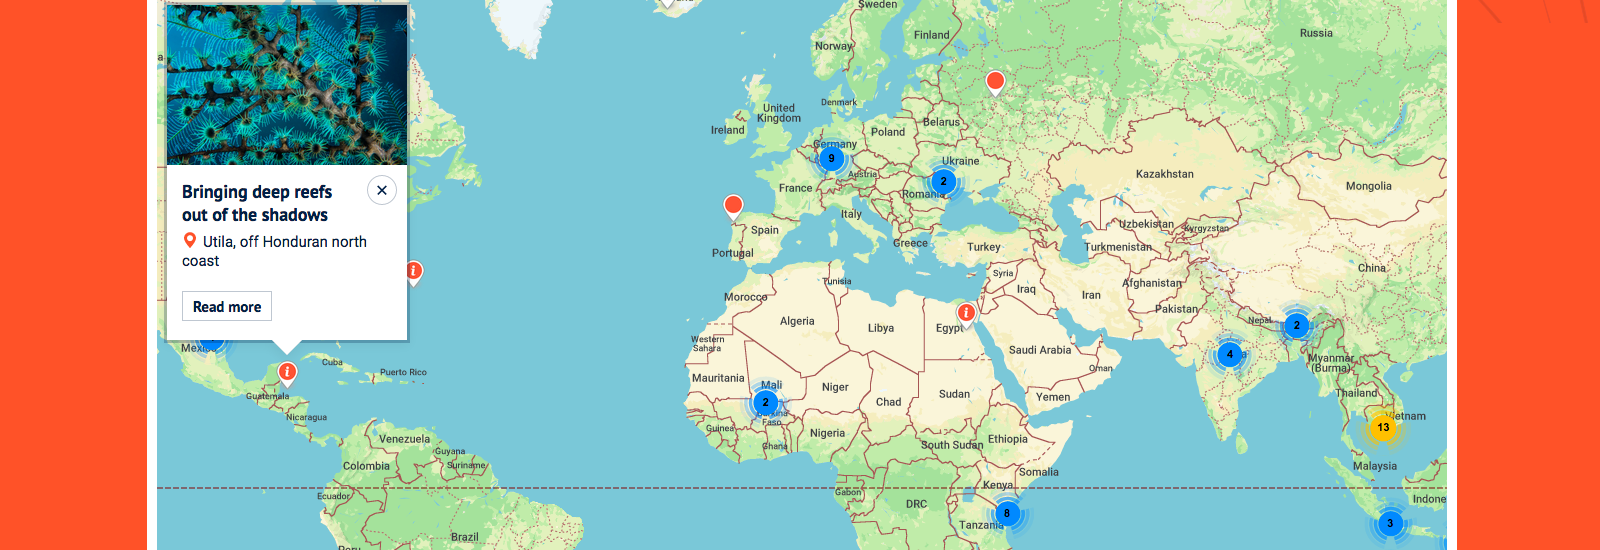 Oxford's Global Research Map